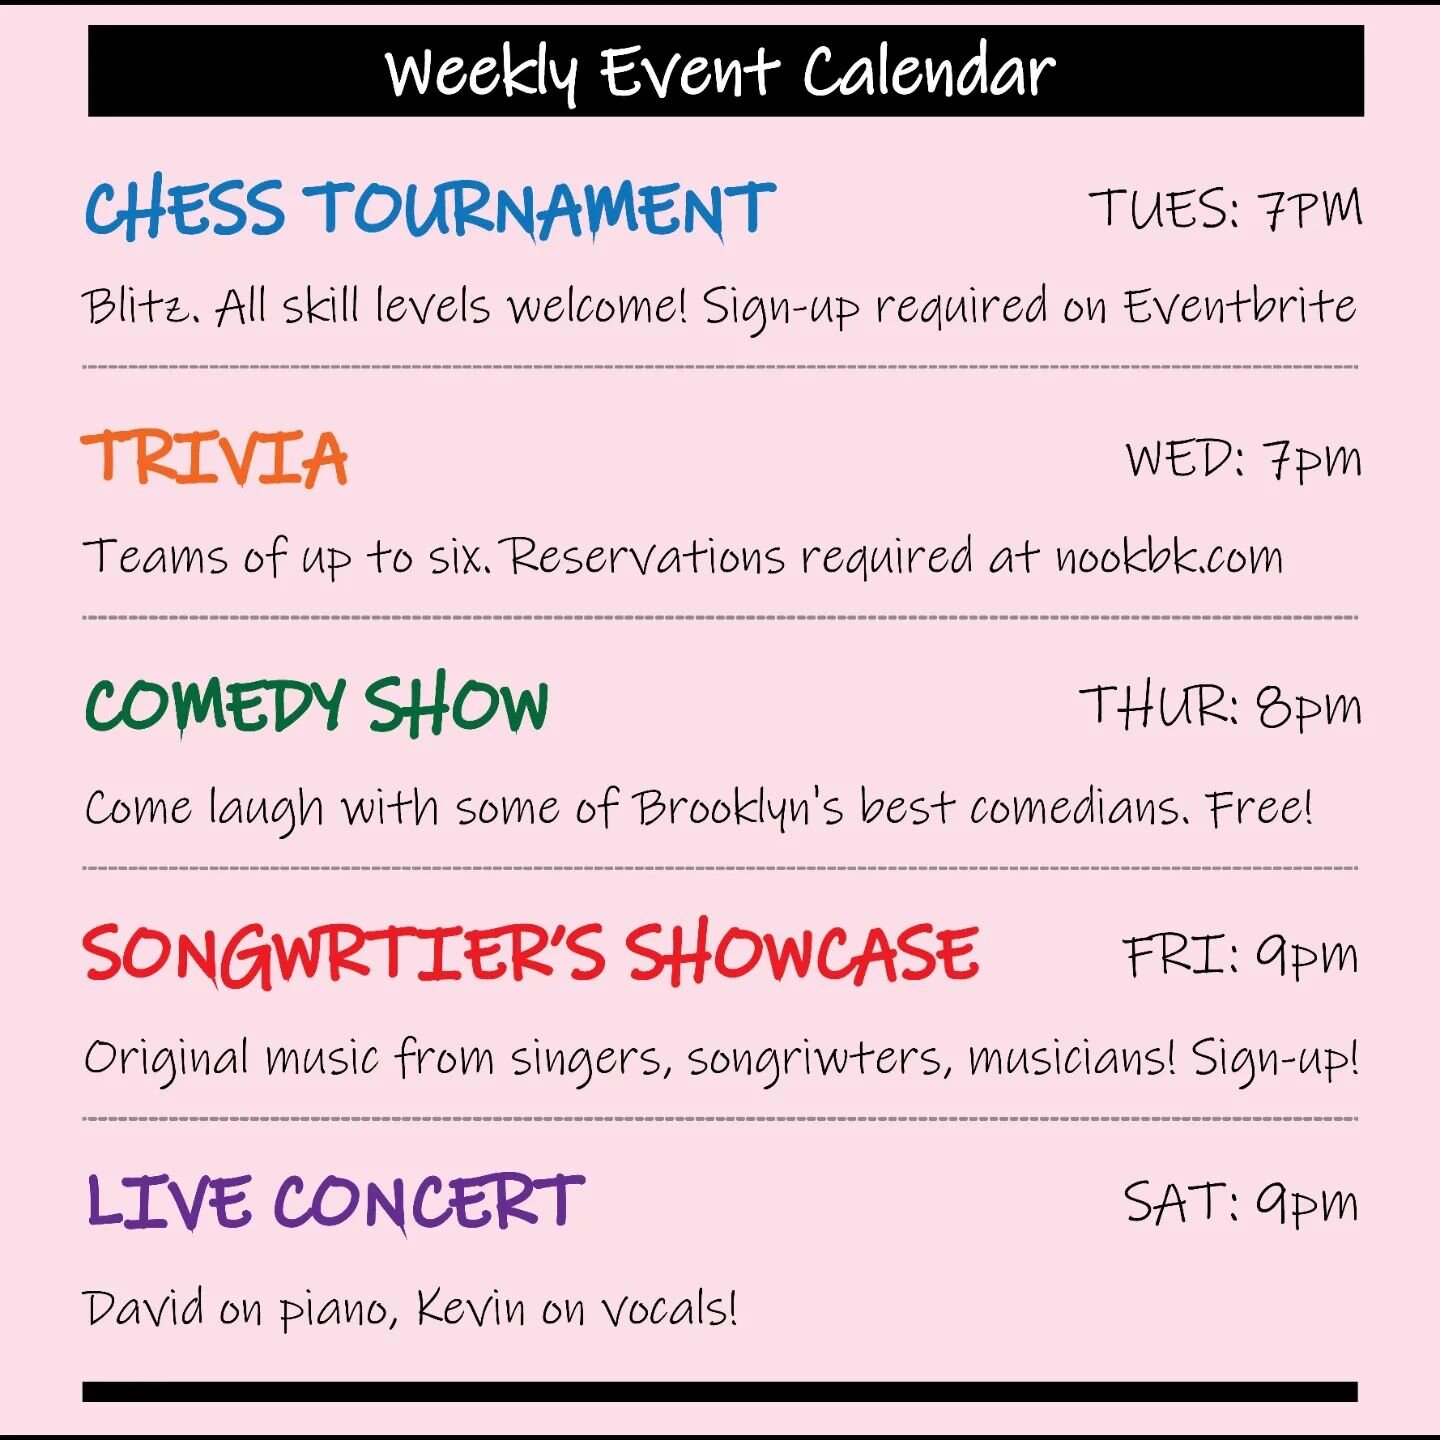 Nook at Night Events this Week!

♟️CHESS TOURNAMENT♟️Tues 7pm. Register on Eventbrite 

⁉️ TRIVIA ⁉️ Wed 7pm. Make reservations at nookbk.com only

🤣 COMEDY SHOW 🤣 Thur 8pm

🎙️SONGWRITER'S SHOWCASE 🎙️ Fri 9pm. Two original songs. Register via DM.